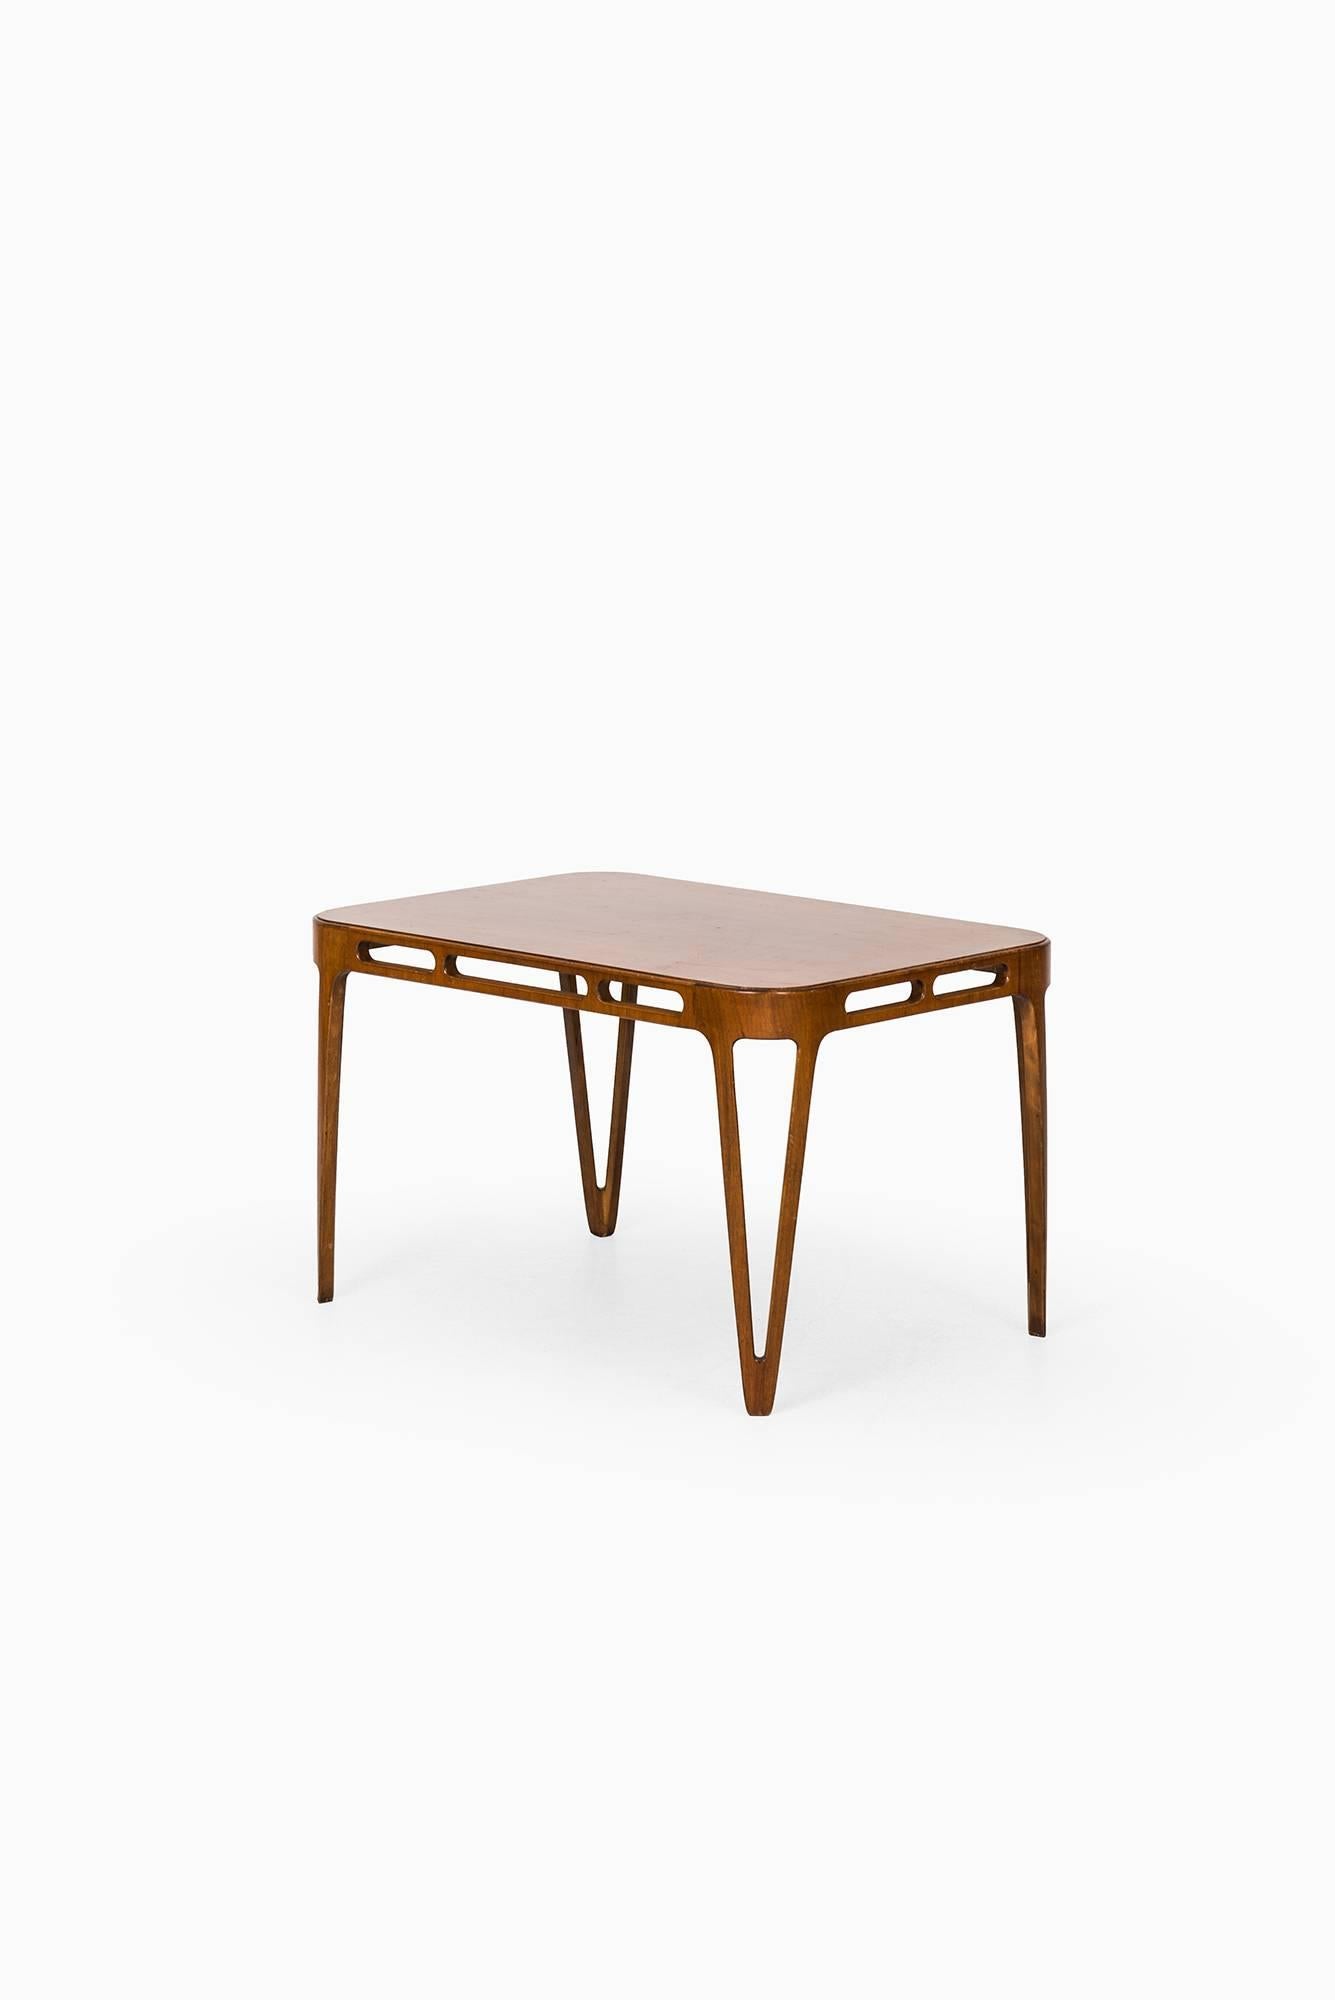 Mid-20th Century Coffee or Side Table Attributed to Carl-Axel Acking Produced by Bodafors